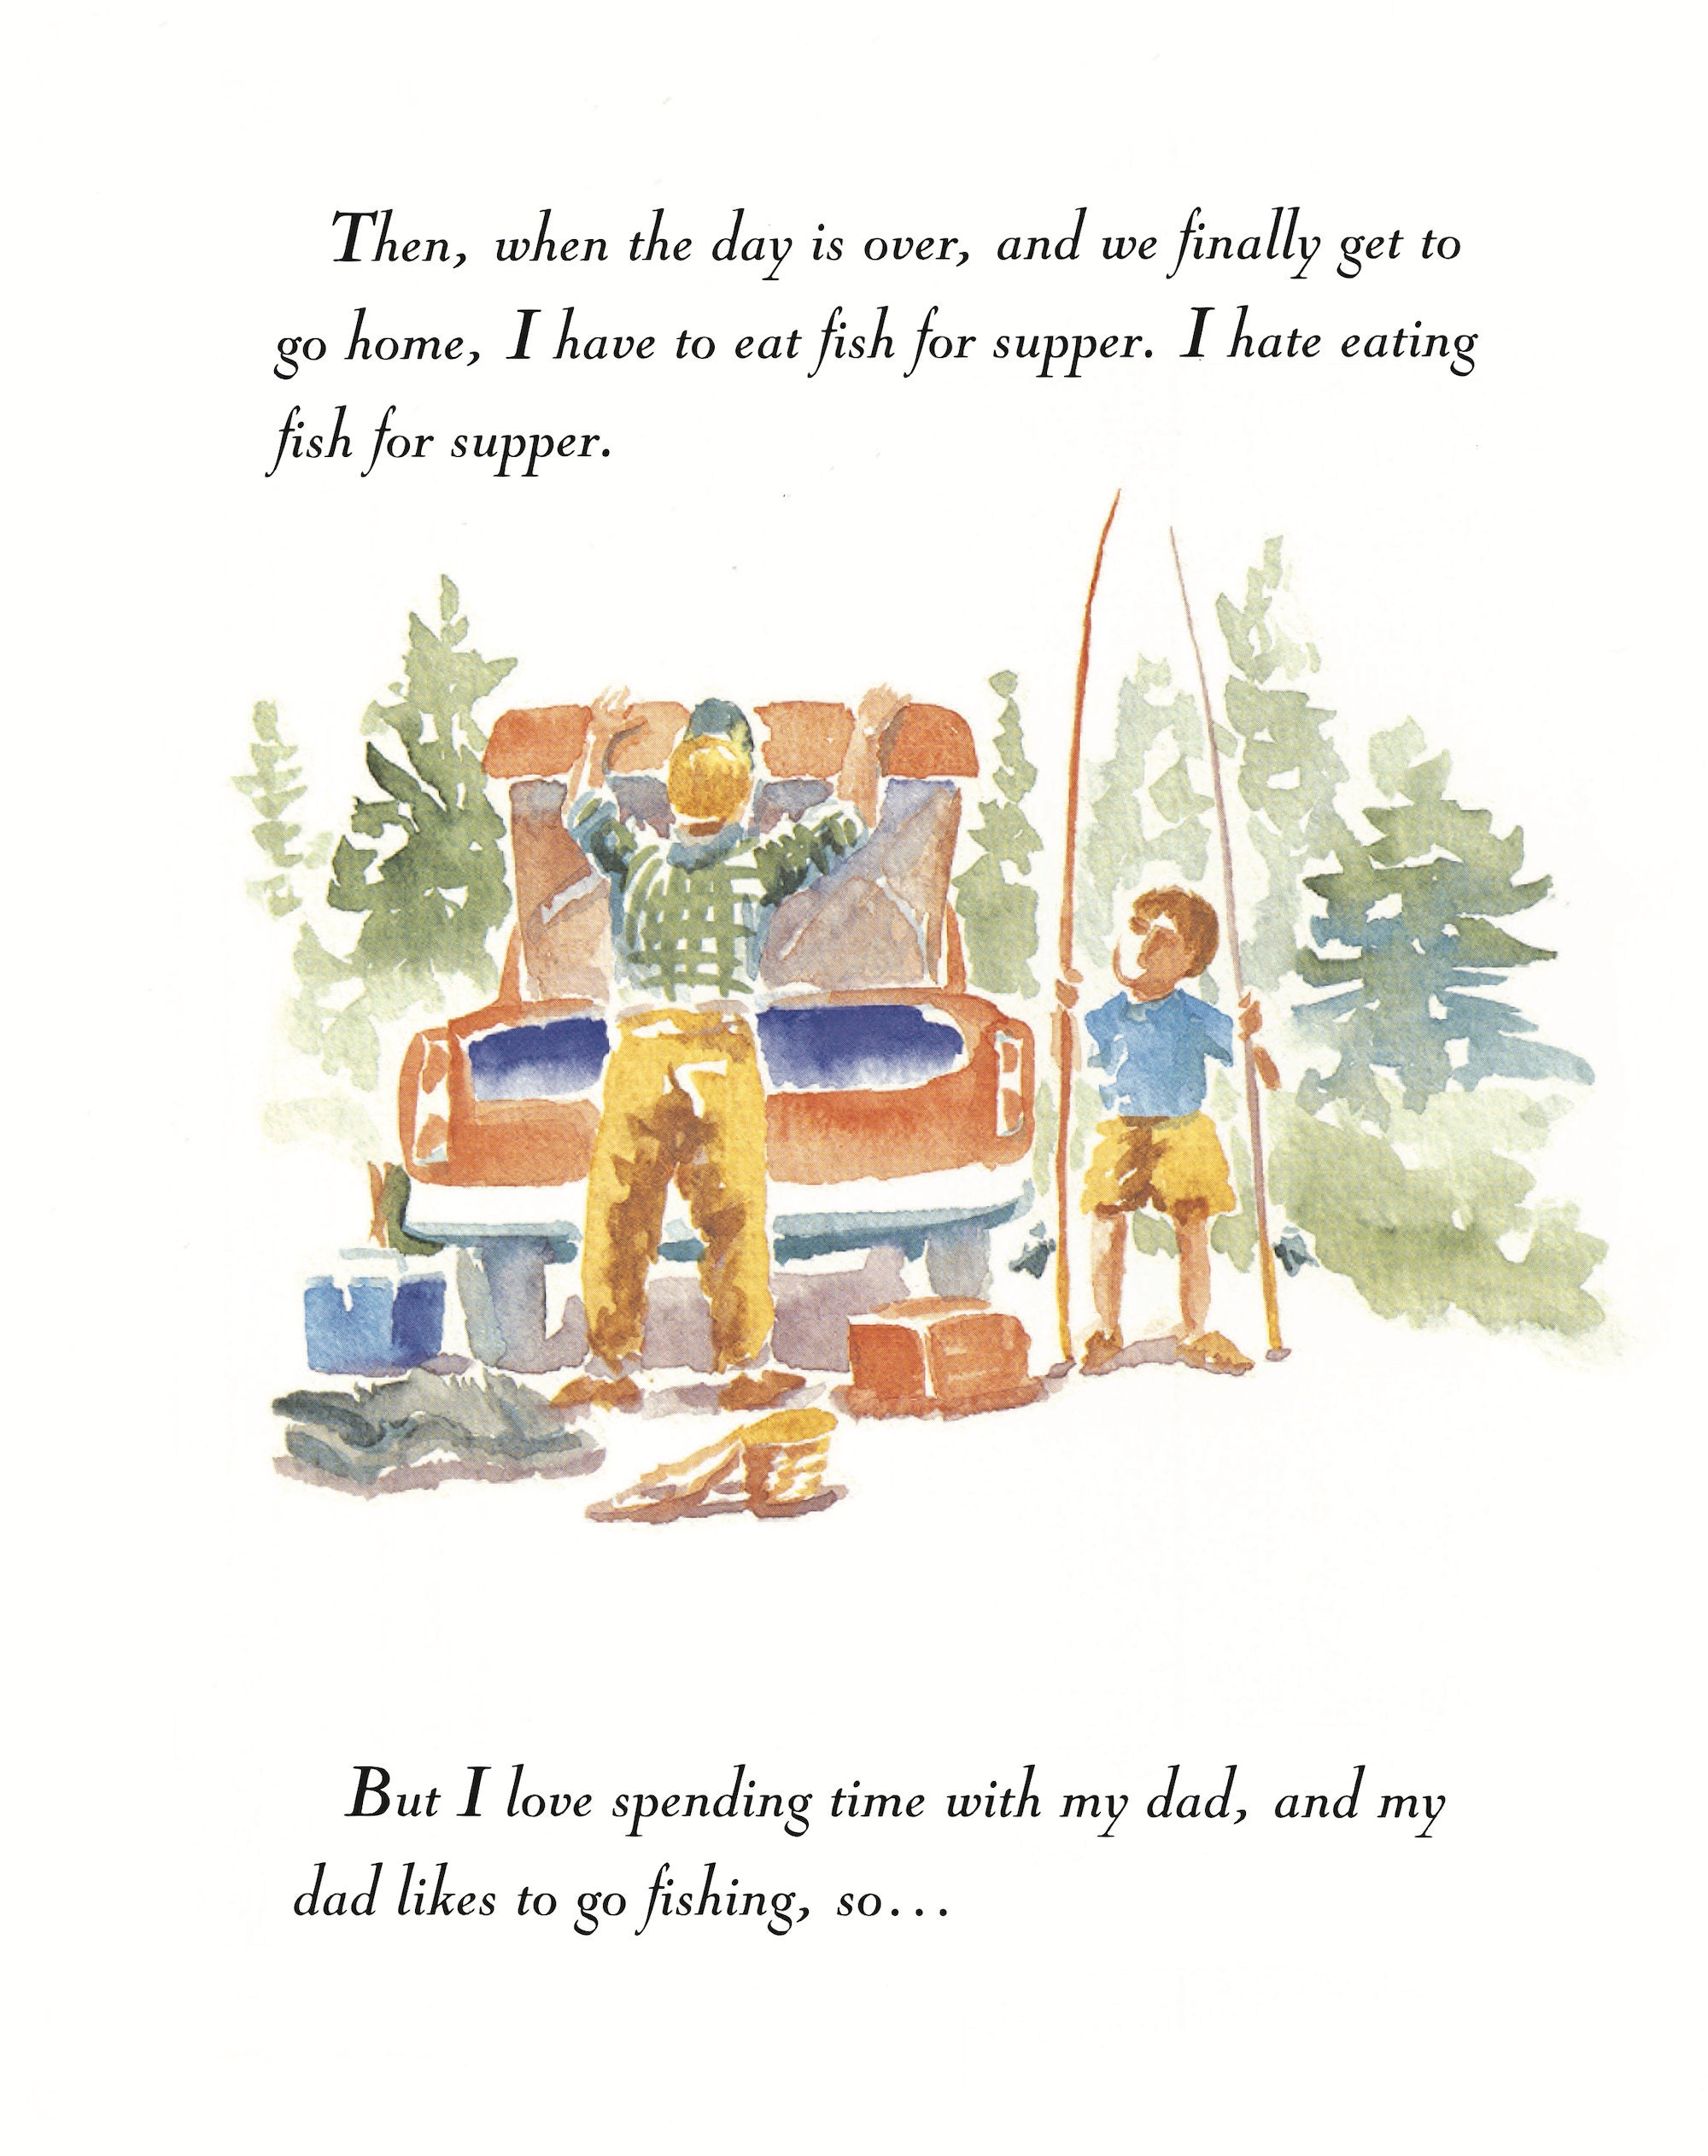 Today I'm Going Fishing With My Dad / Children's Paperback Coffee